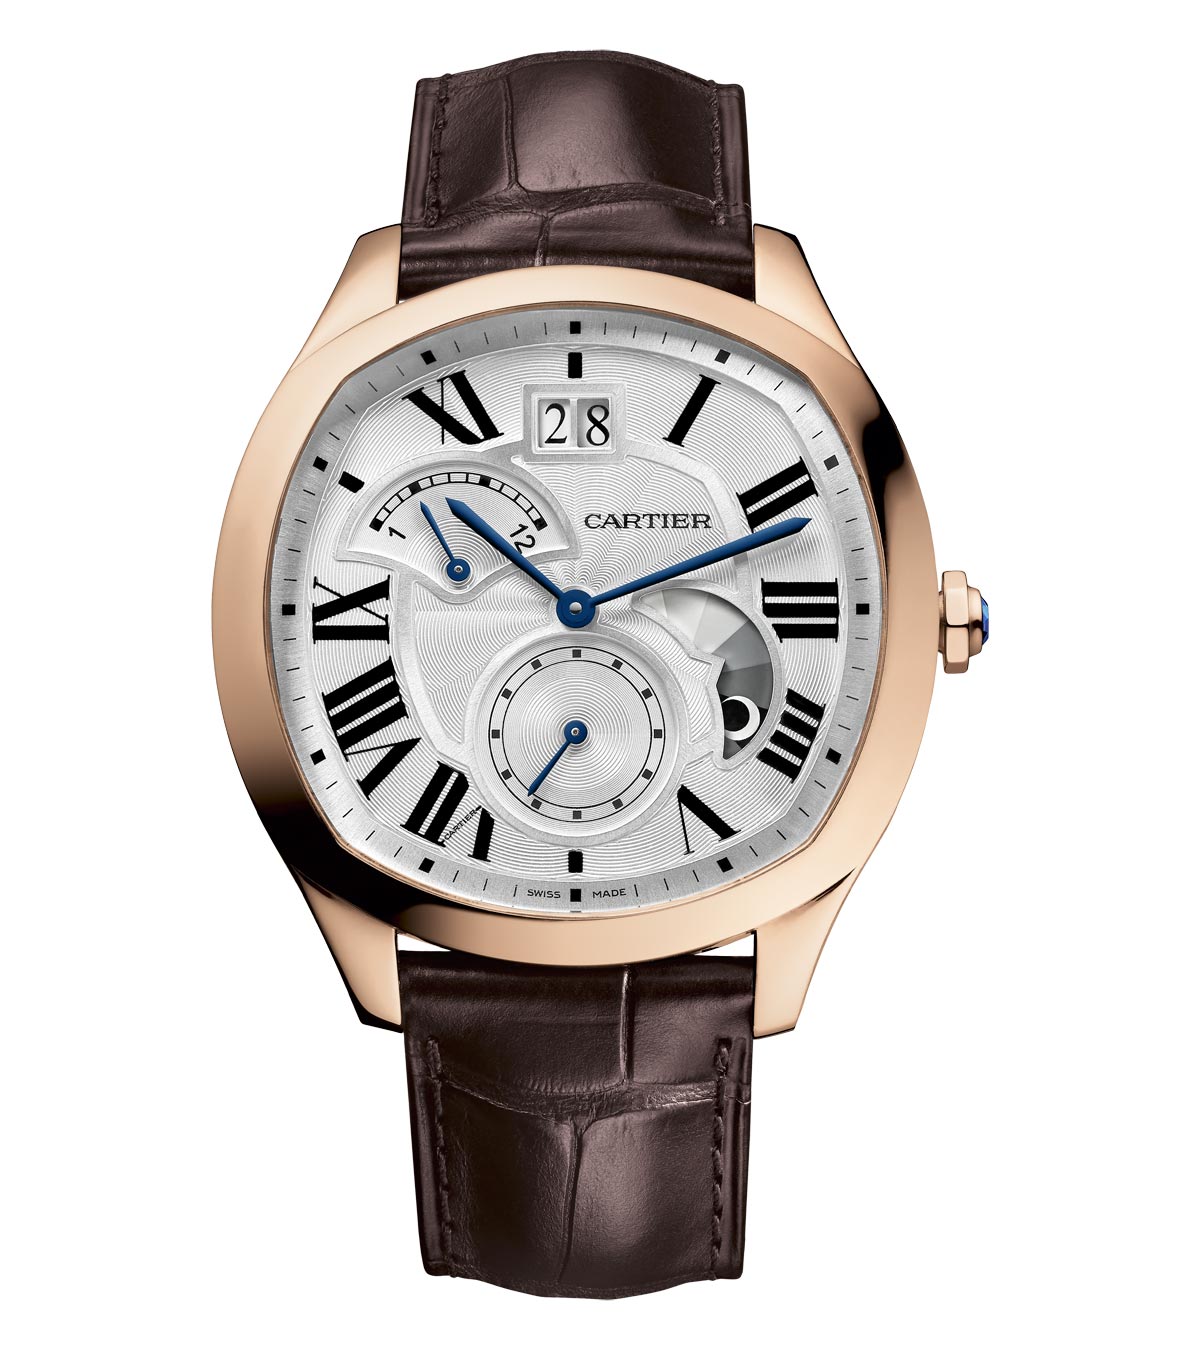 SIHH 2016: Cartier - Drive de Cartier Collection | Time and Watches